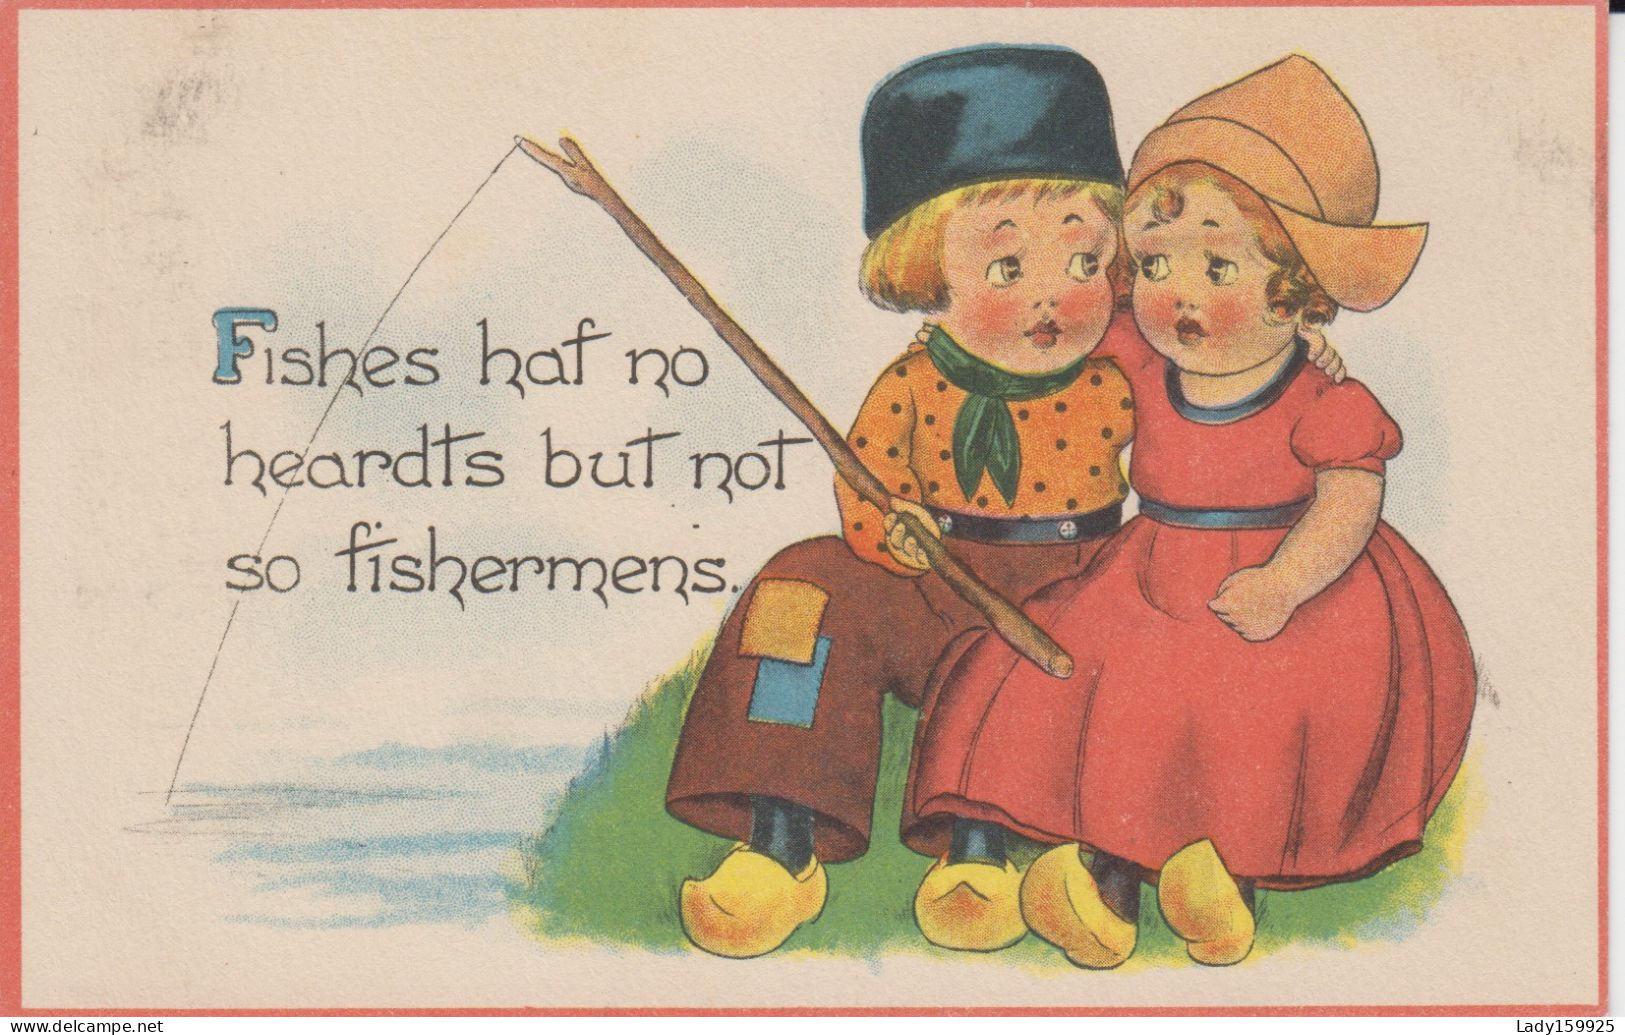 Fishes Haf No Heardts But Not So Fishermens,  Enfants Assis Bâton Comme Canne Pêche   2s - Humorous Cards